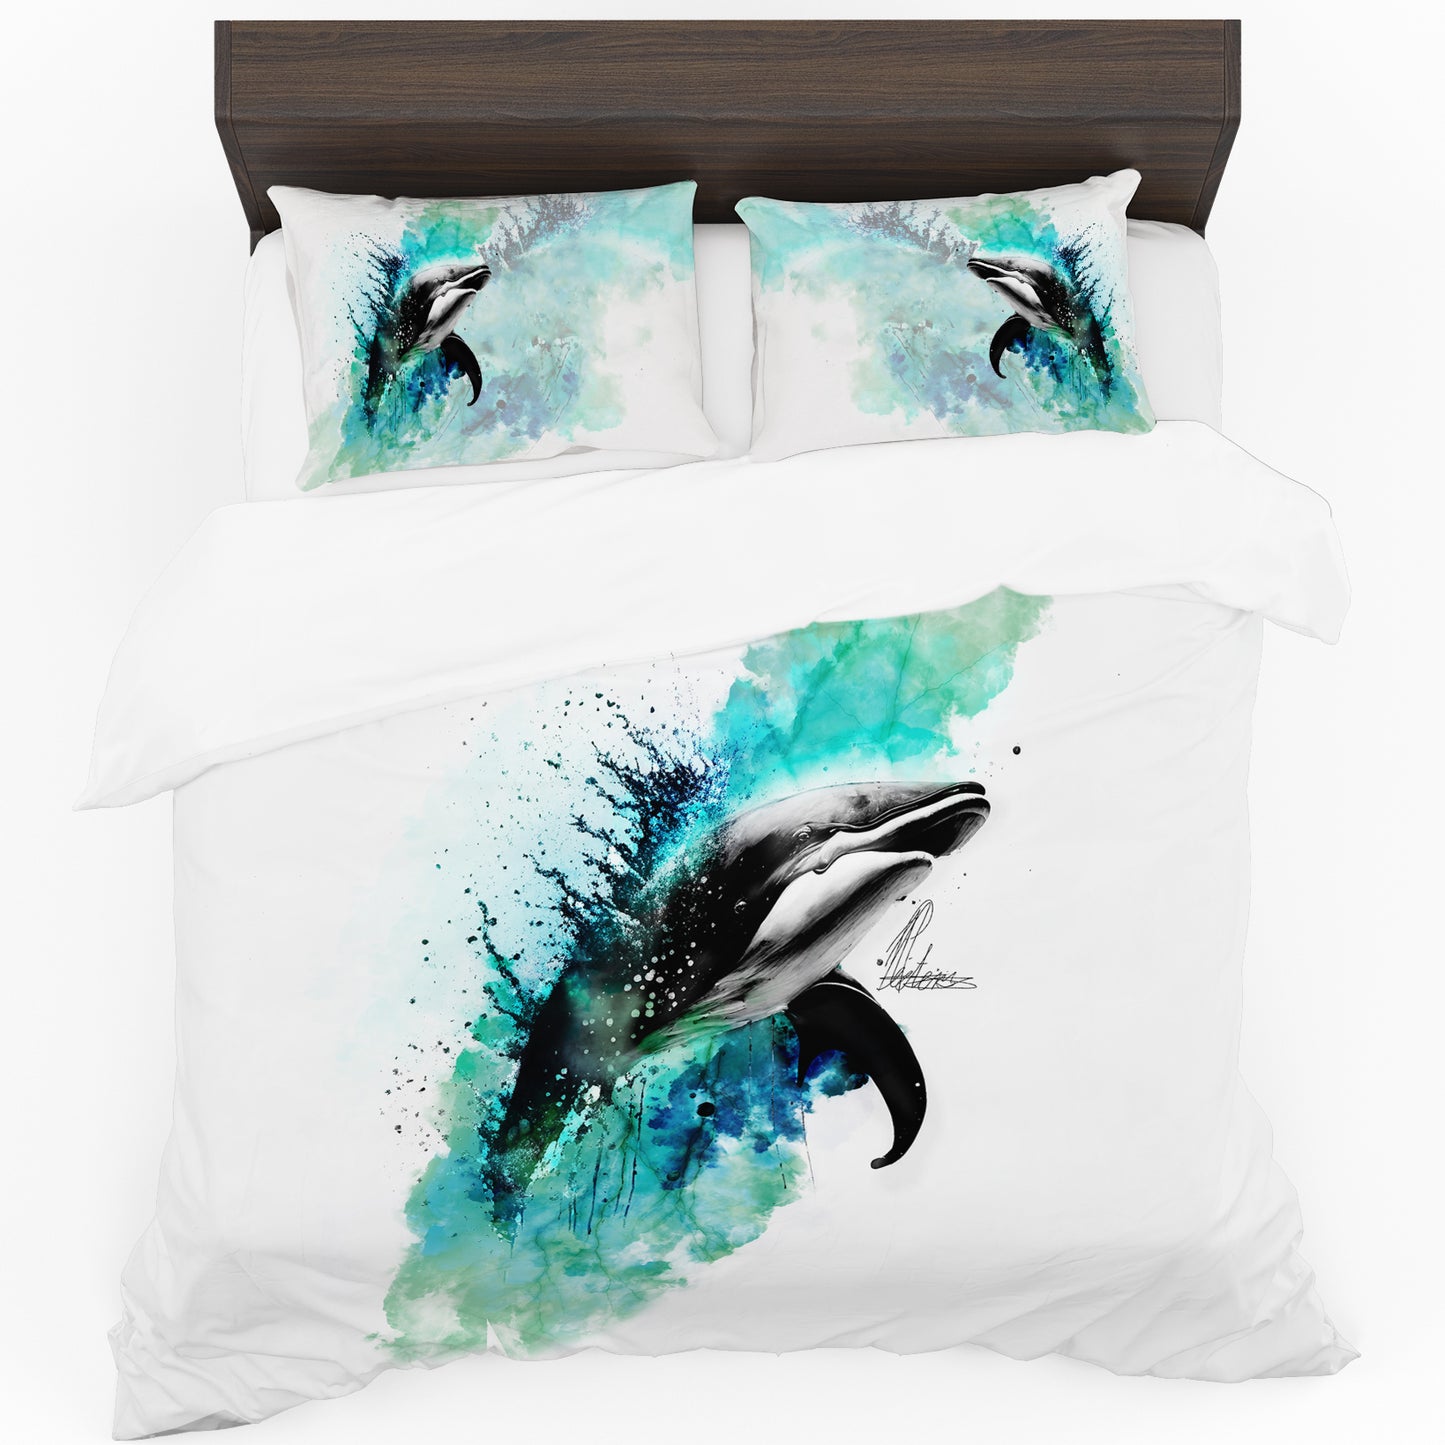 Whale By Nathan Pieterse Duvet Cover Set